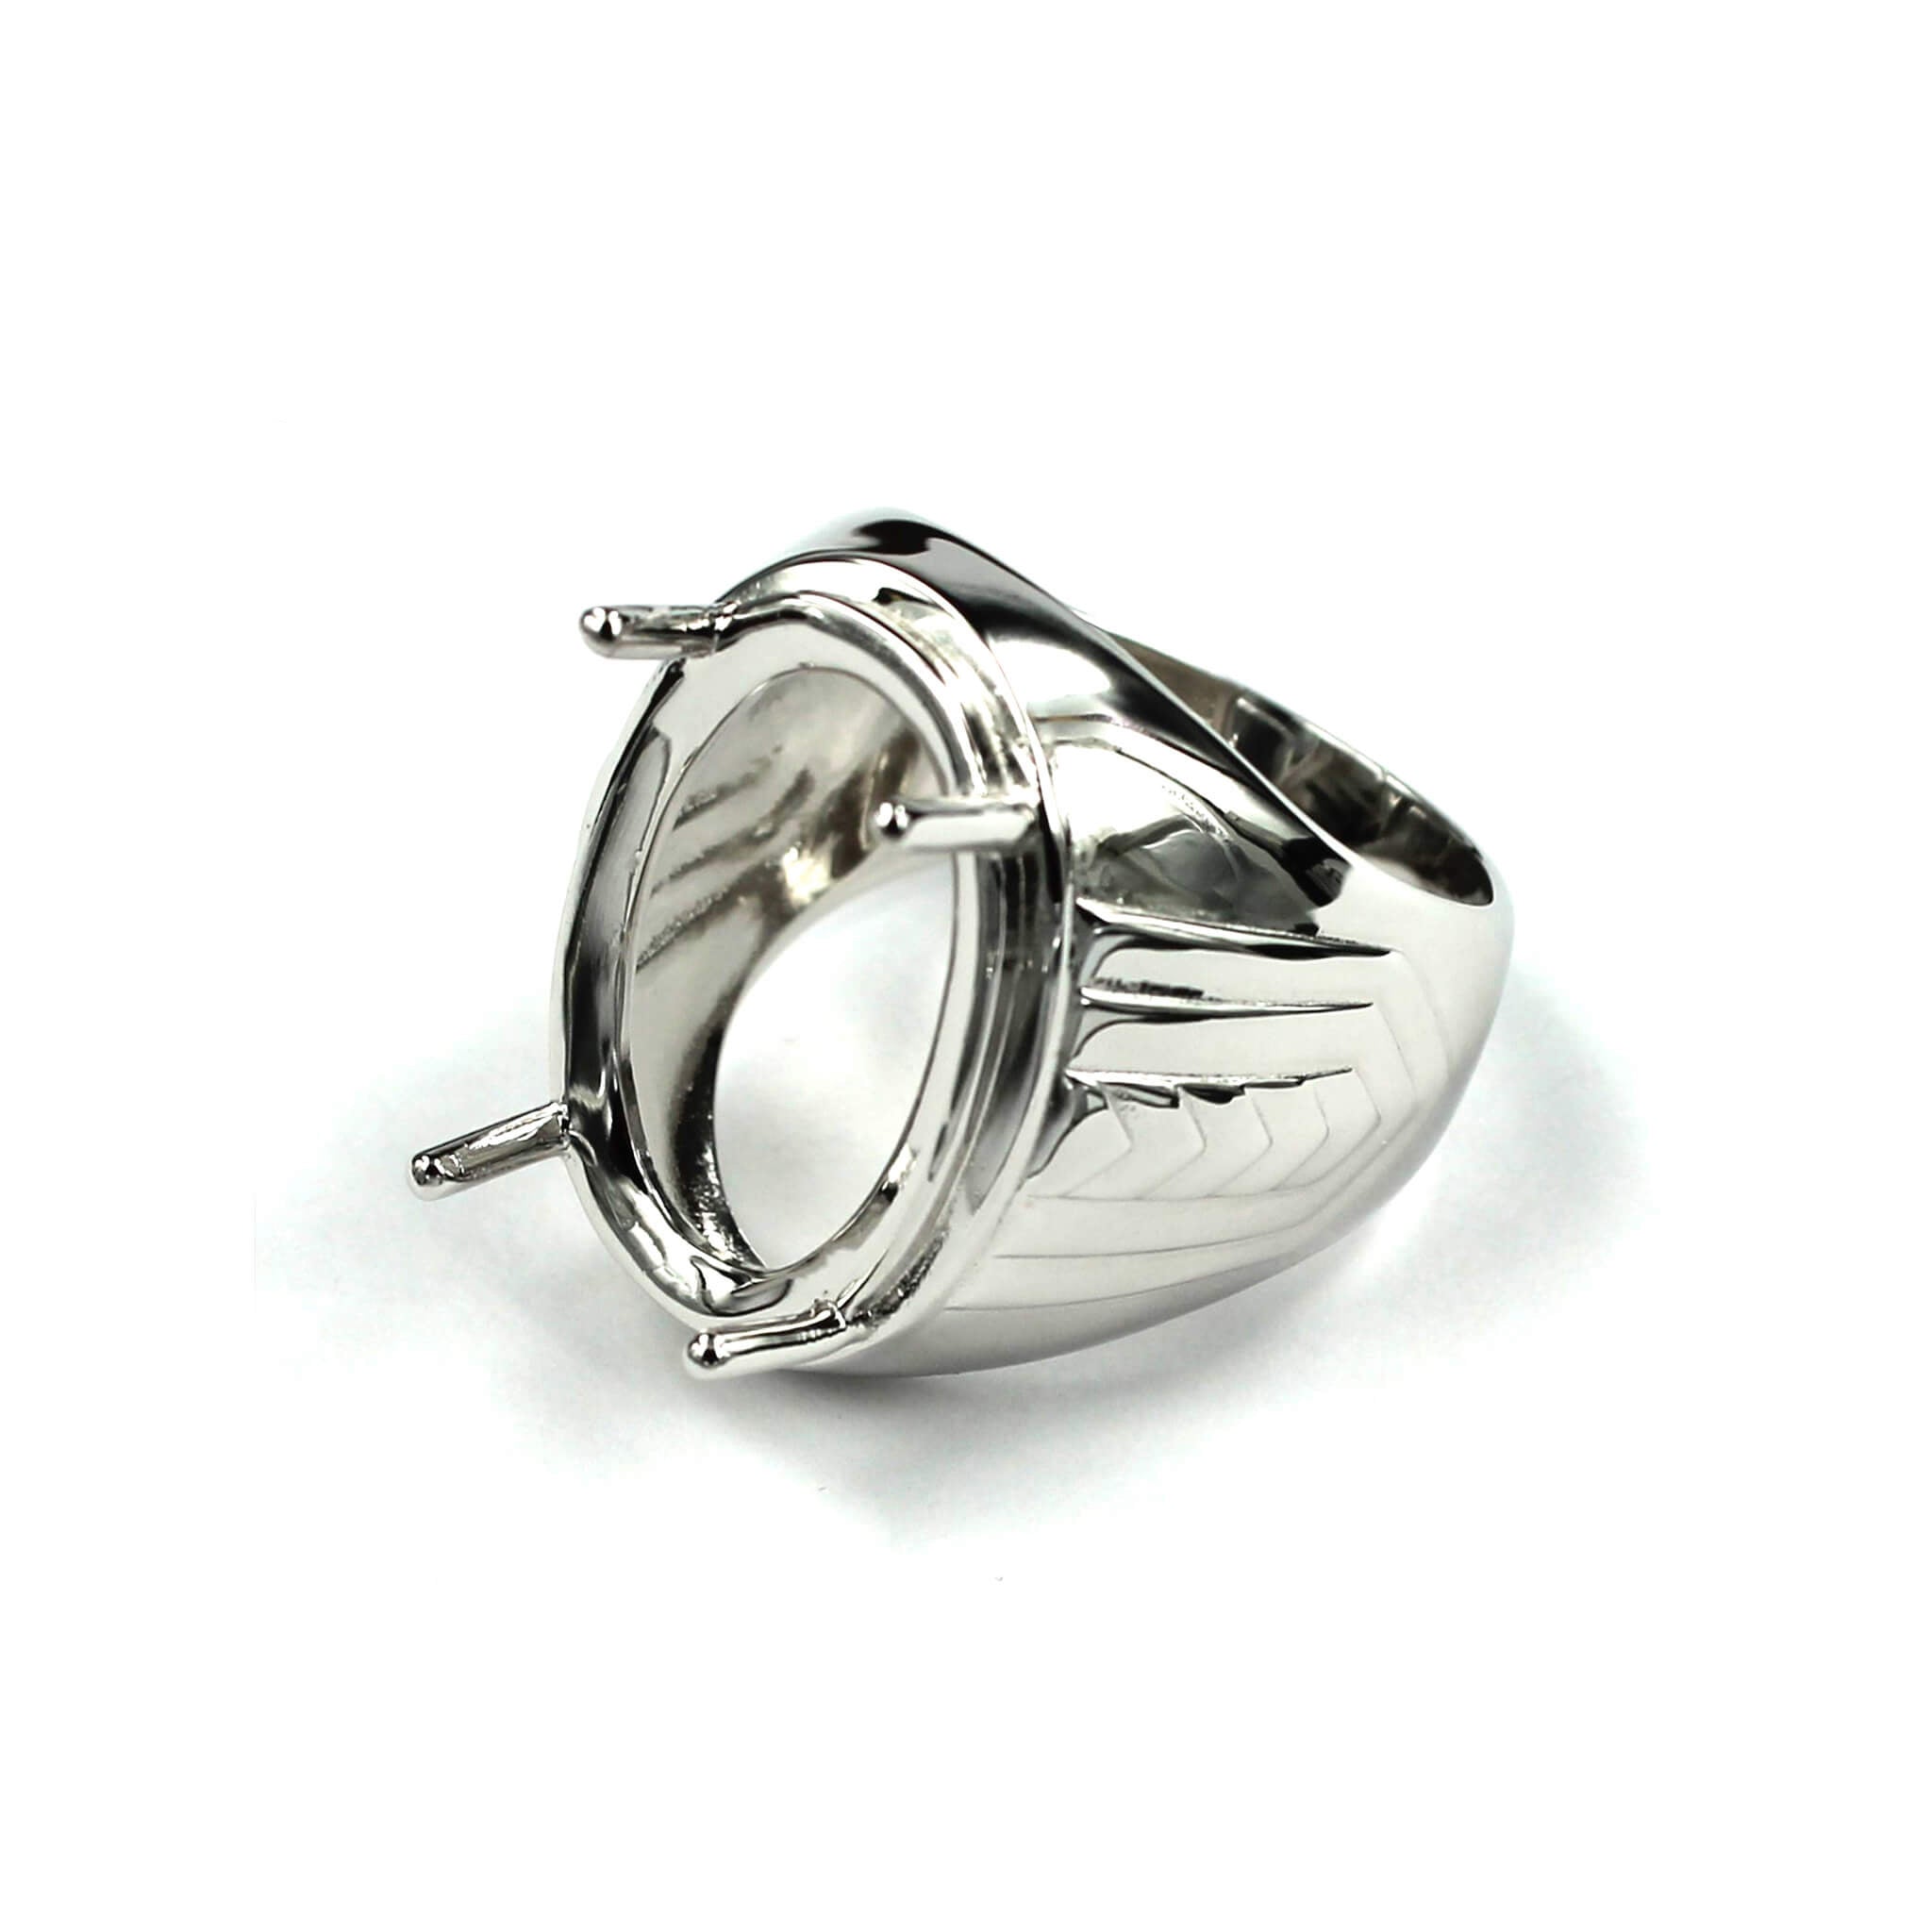 Patterned Ring with Oval Prongs Mounting in Sterling Silver 16x24mm